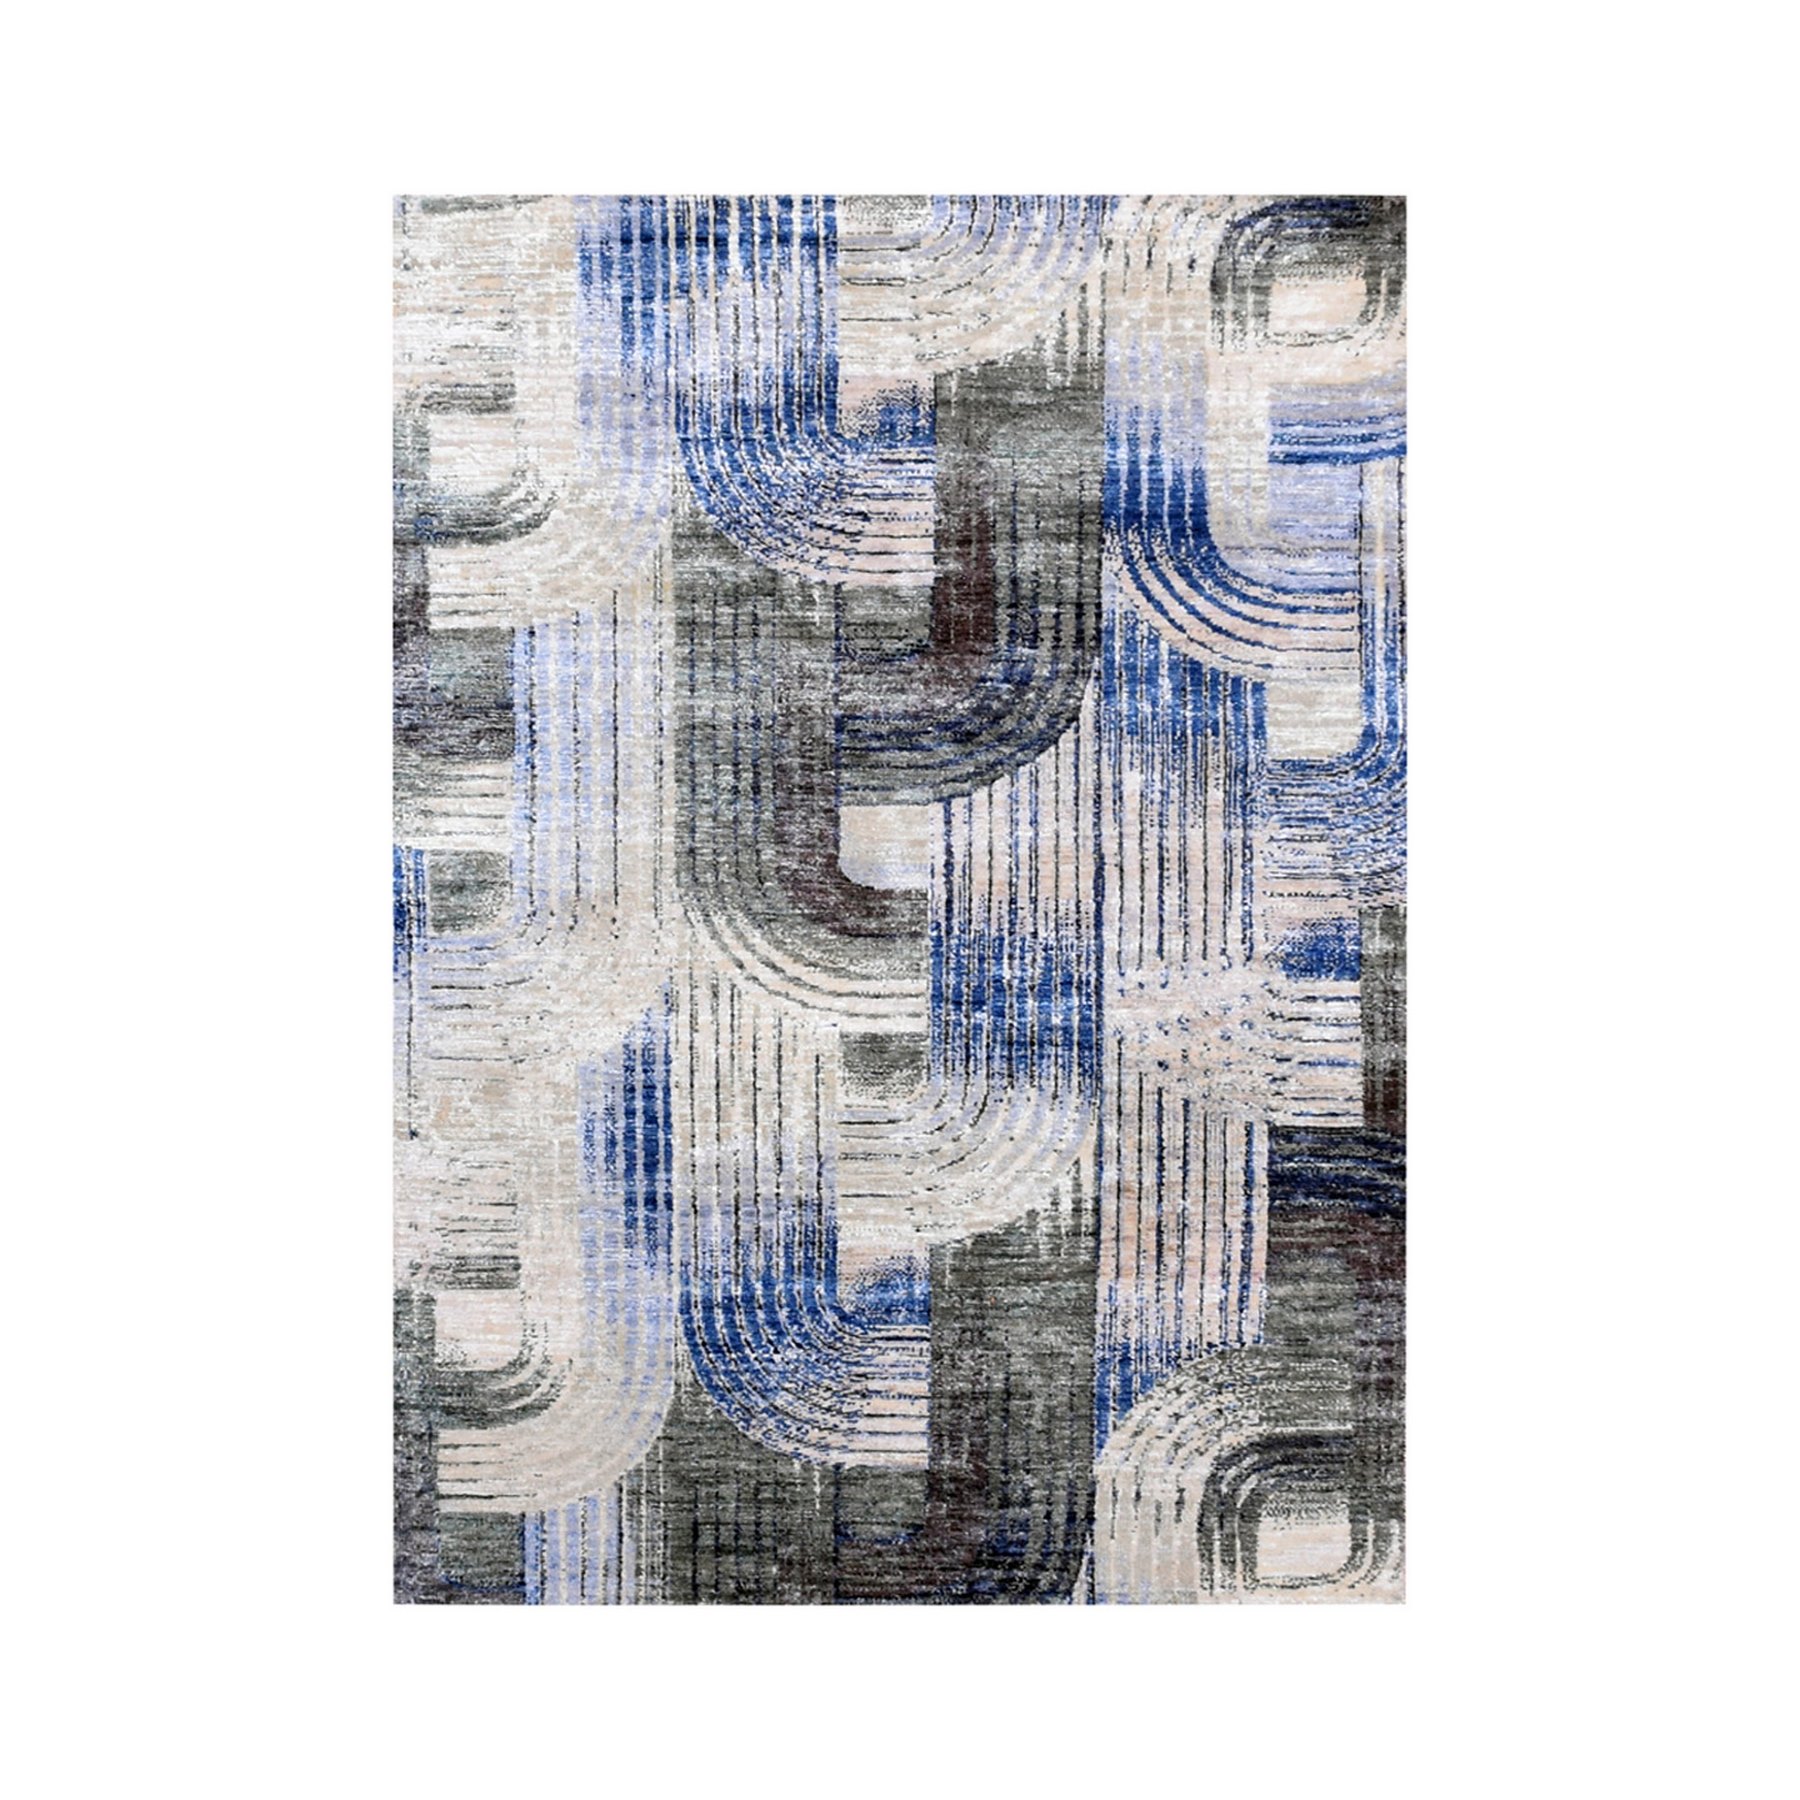 4'x6'1" THE INTERTWINED PASSAGE, Silk with Textured Wool, Hand Woven Oriental Rug 